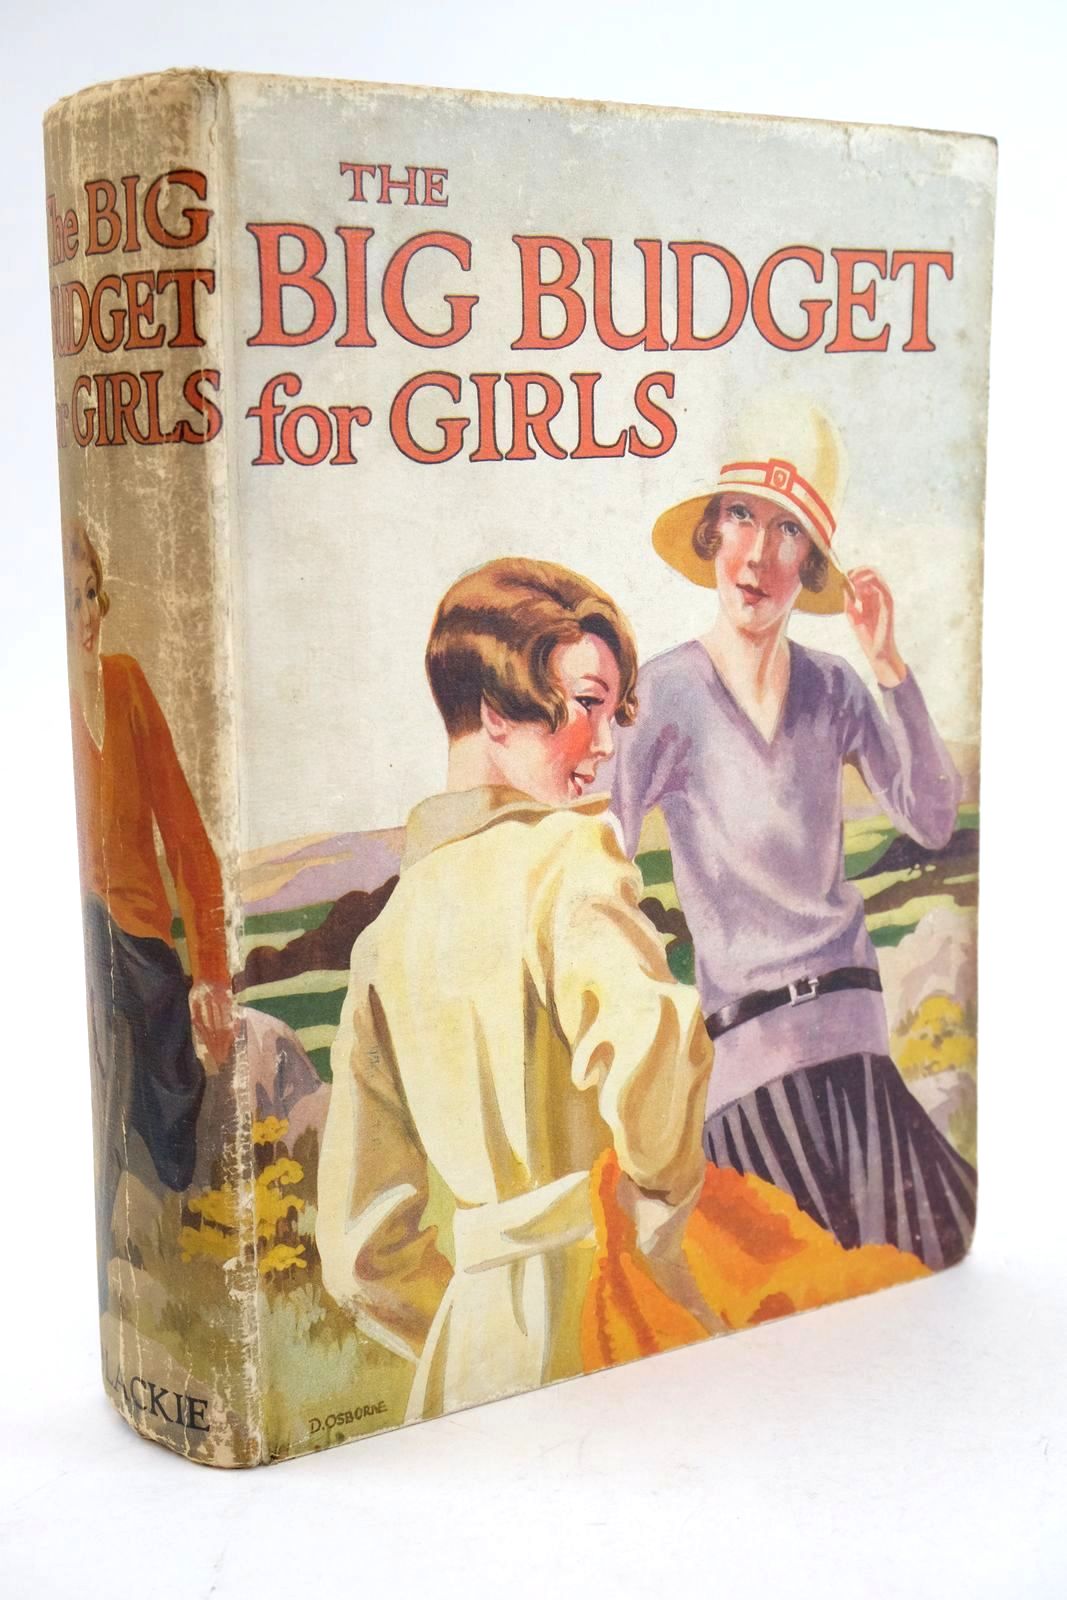 Photo of THE BIG BUDGET FOR GIRLS written by Matthews, E.C.
Marchant, Bessie
Rutley, C. Bernard
et al, illustrated by Bacon, H.L.
Wilson, Radcliffe
Cafferata, D.M. published by Blackie & Son Ltd. (STOCK CODE: 1325127)  for sale by Stella & Rose's Books